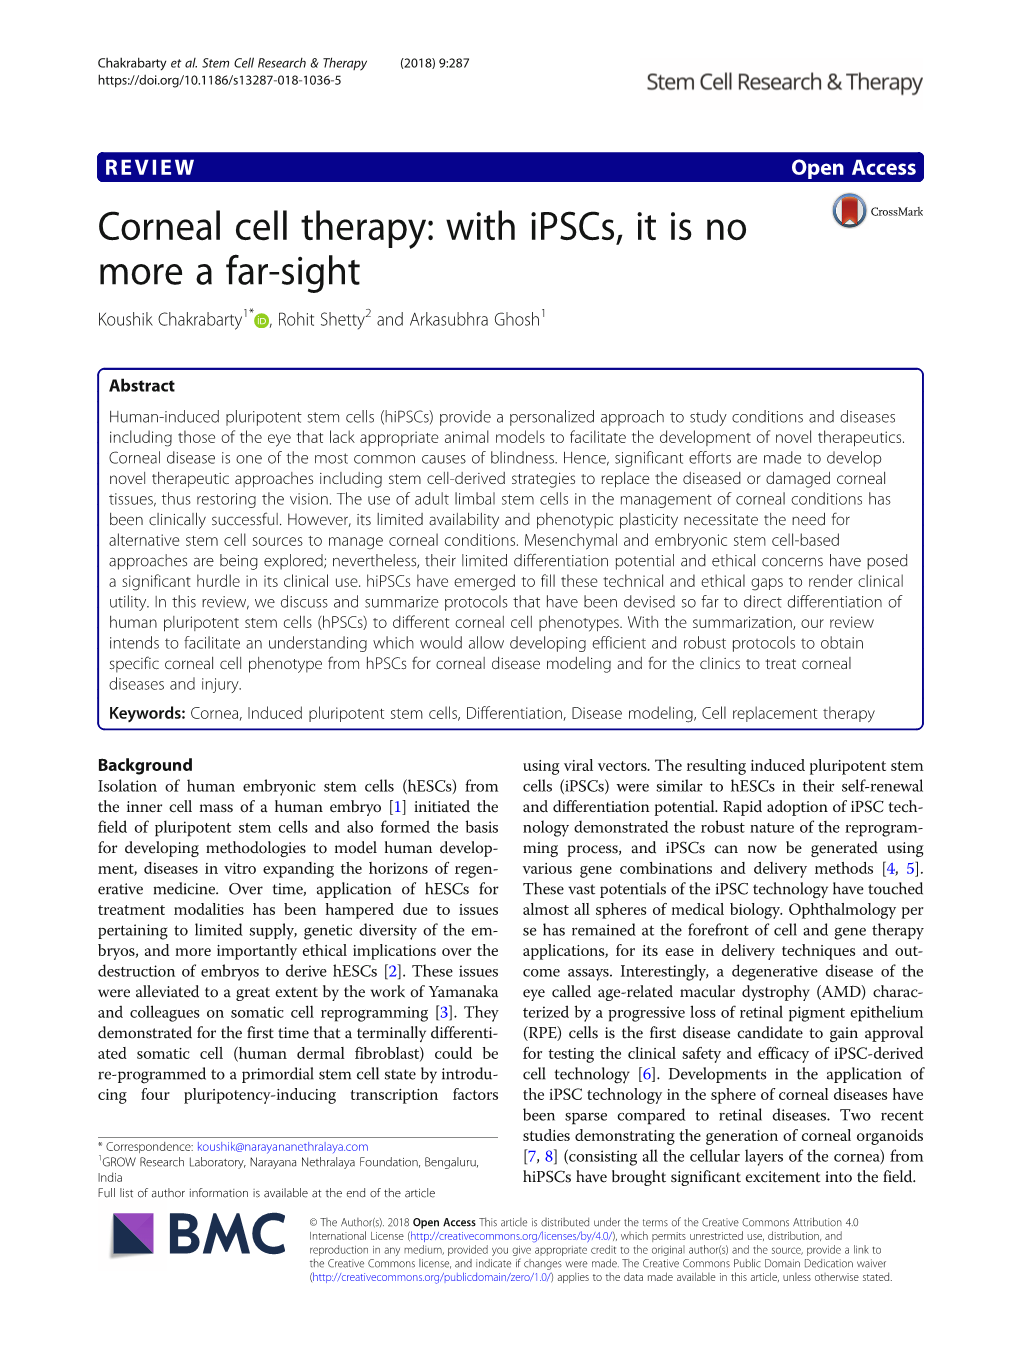 Corneal Cell Therapy: with Ipscs, It Is No More a Far-Sight Koushik Chakrabarty1* , Rohit Shetty2 and Arkasubhra Ghosh1